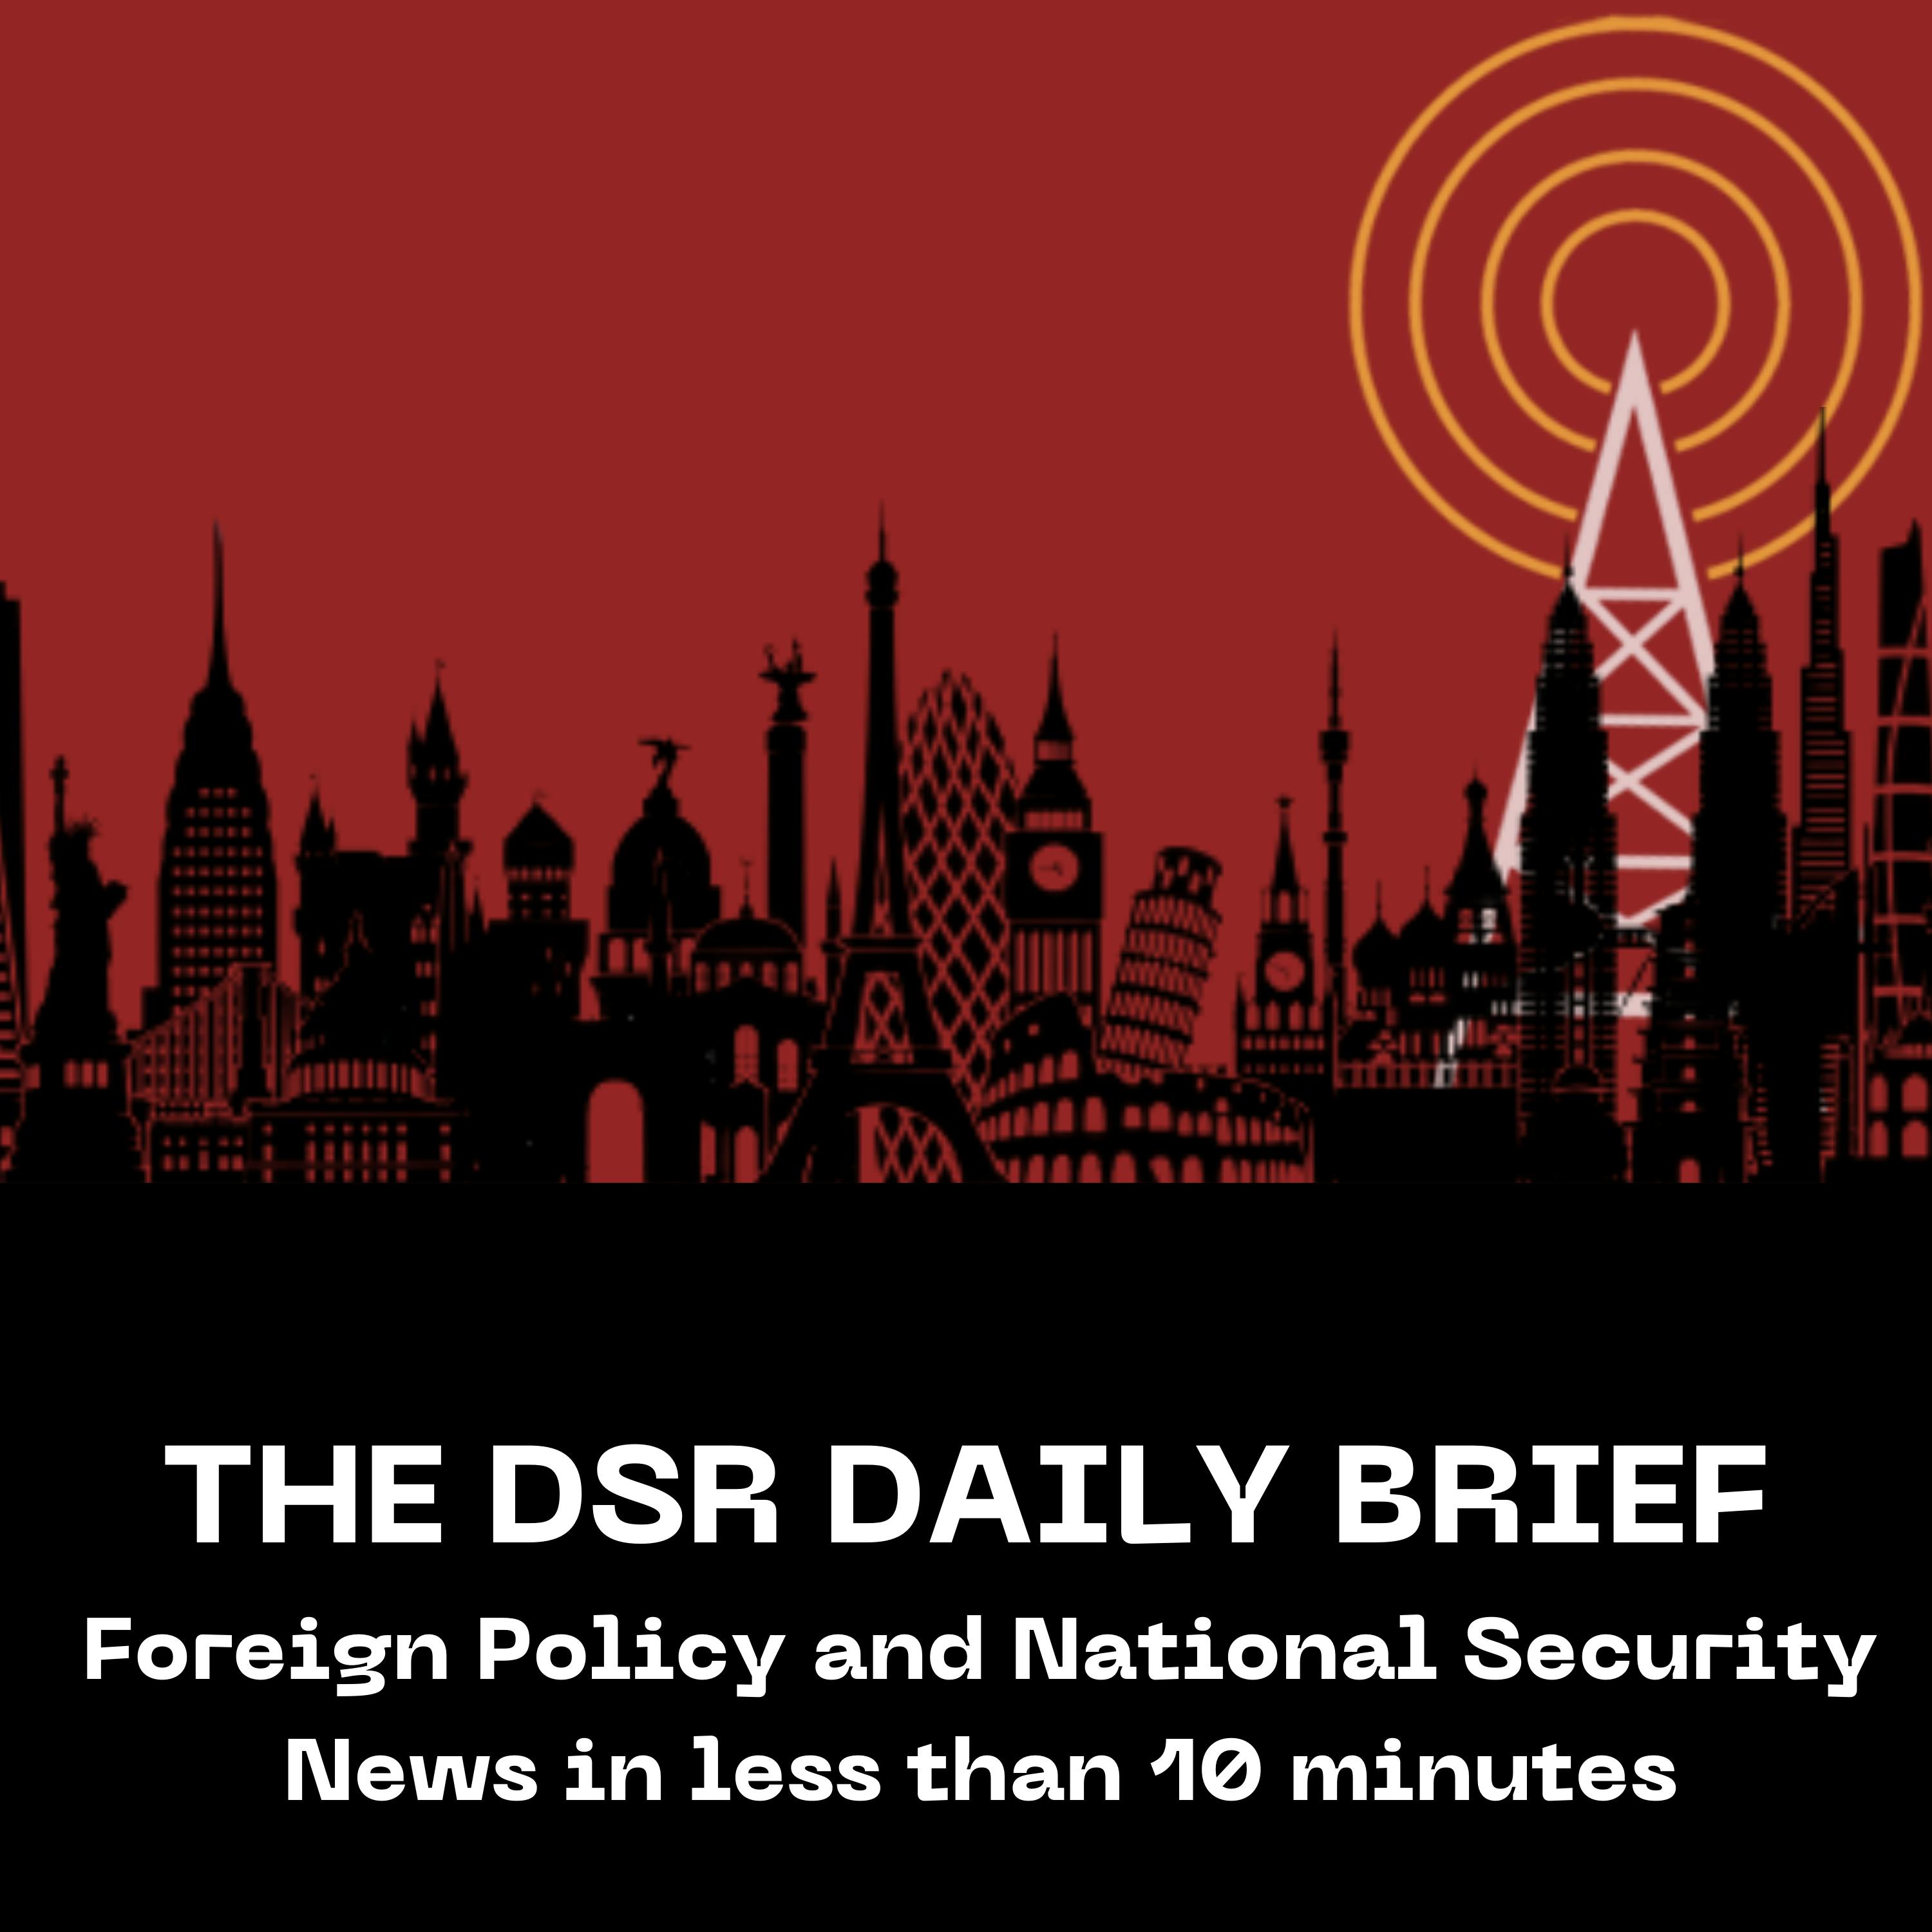 The DSR Daily for March 29: Ukraine’s Foreign Minister Visits India, Bankman-Fried Sentenced to 25 Years